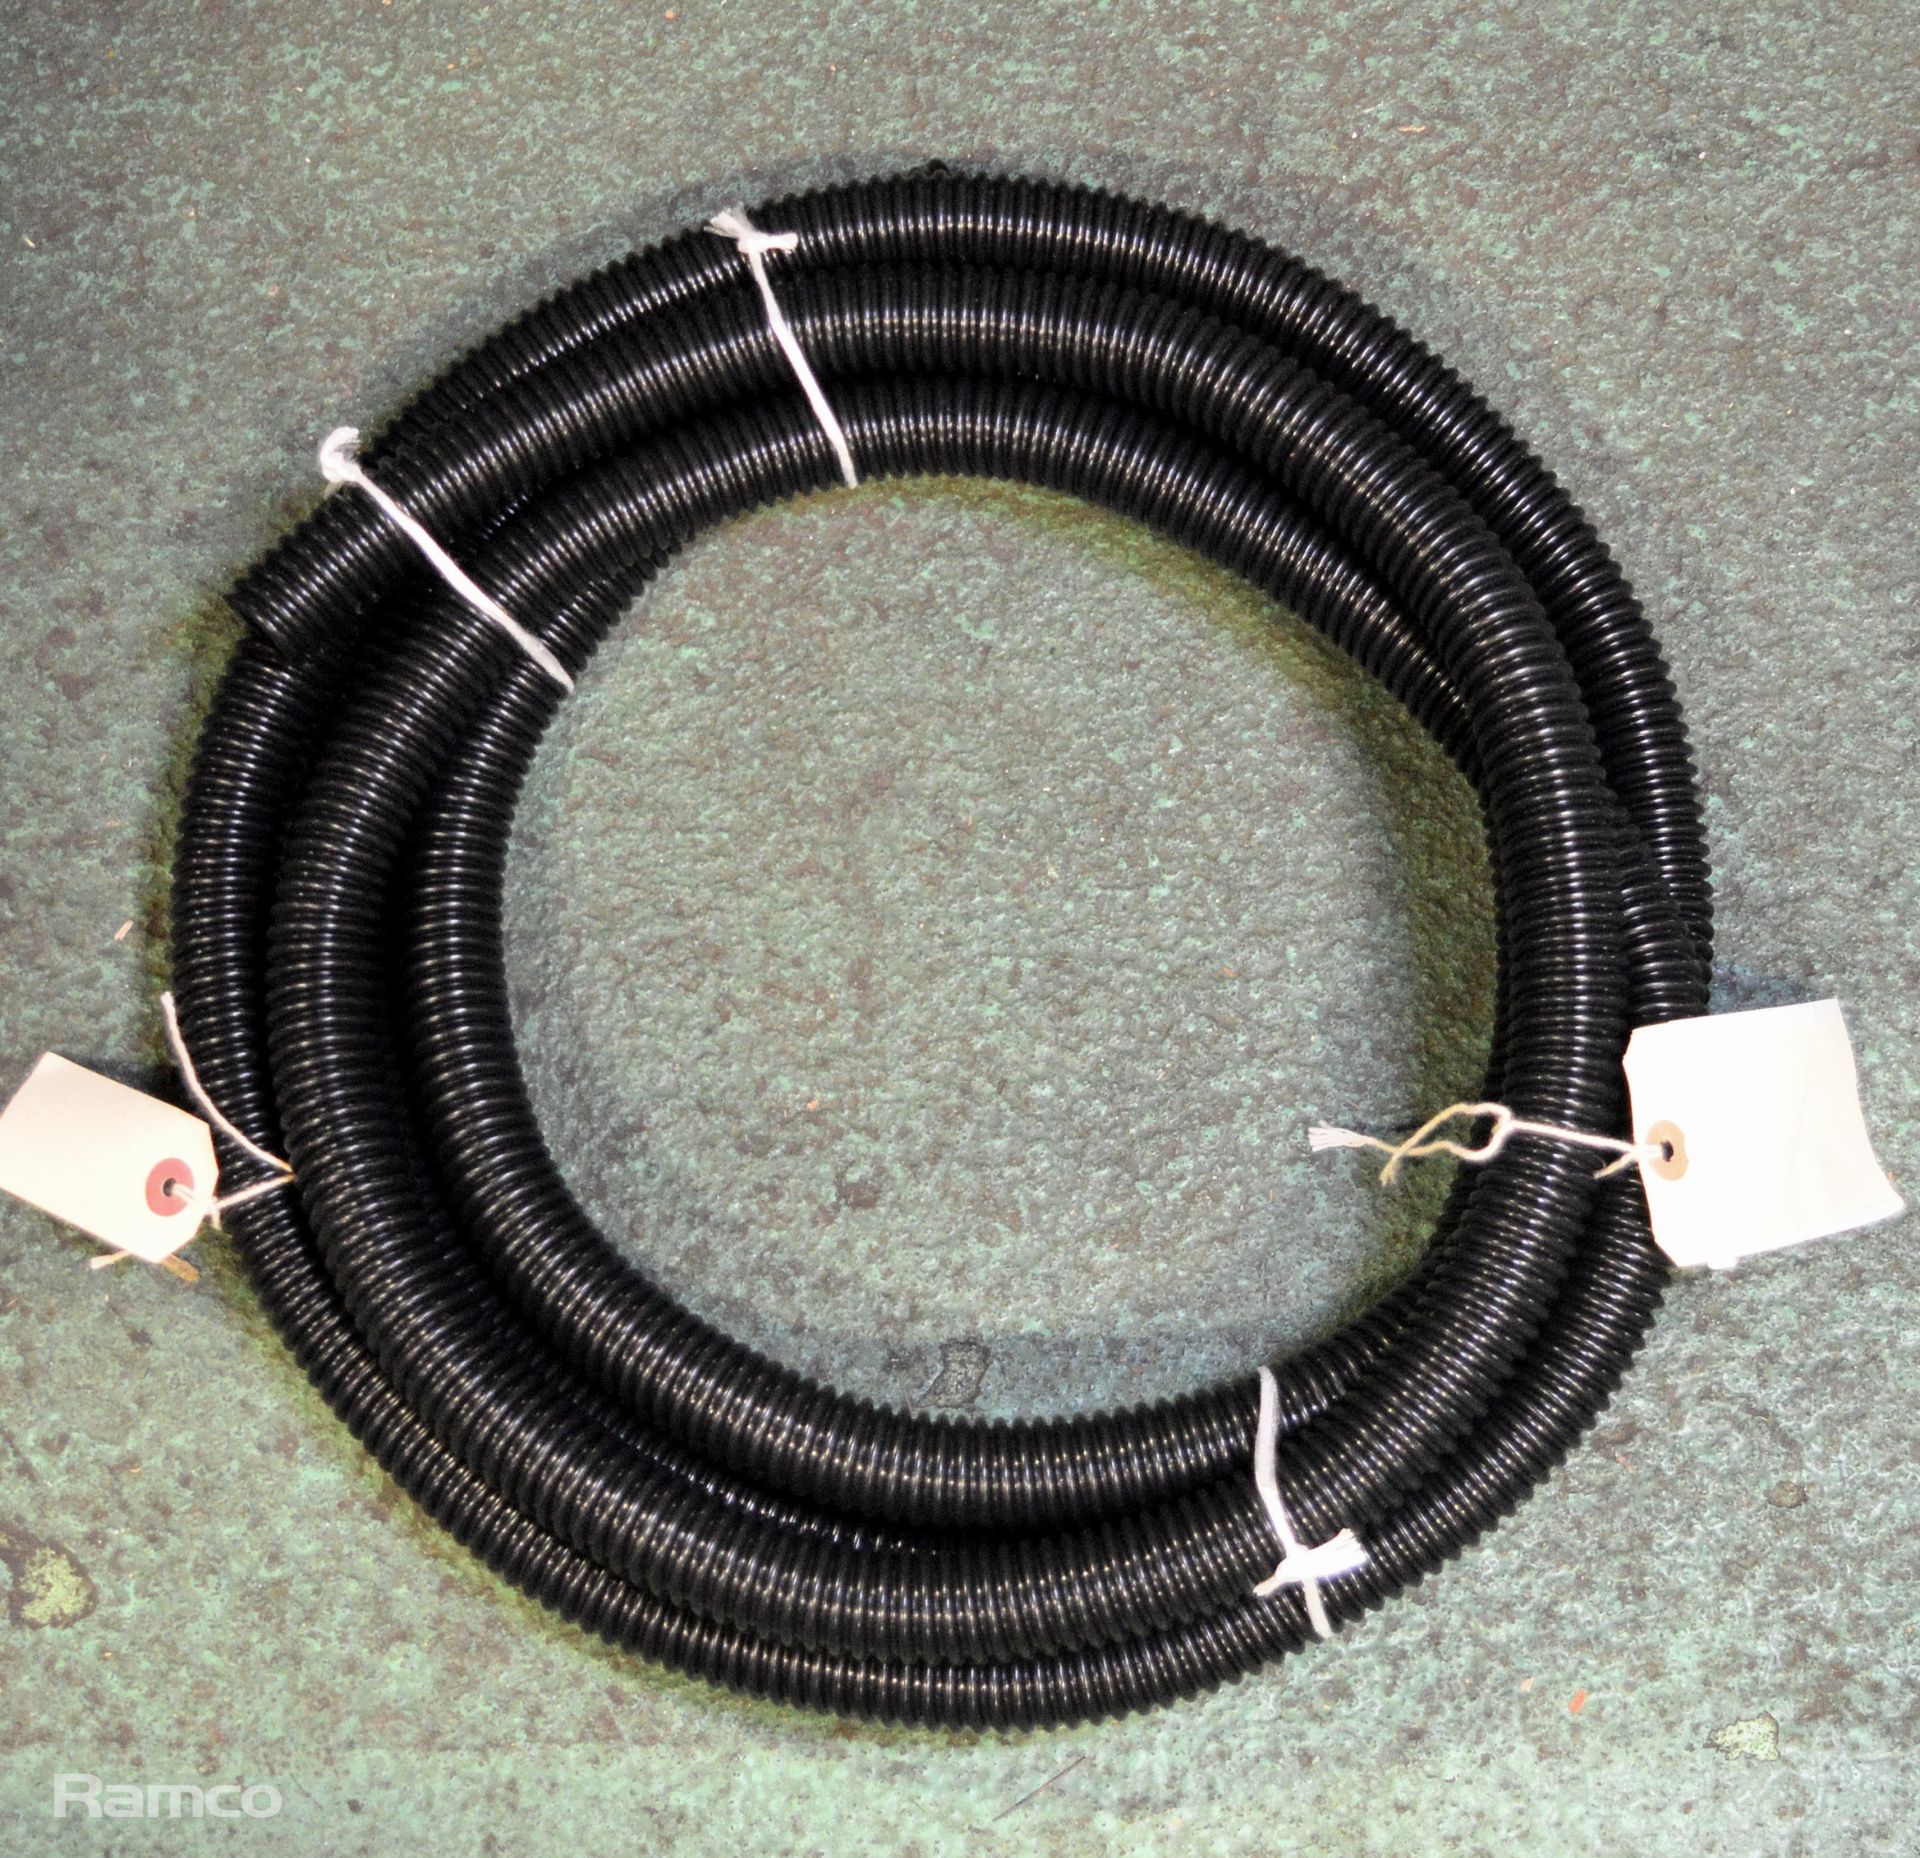 6x Electric conduit lengths - 4 metres - Image 2 of 4